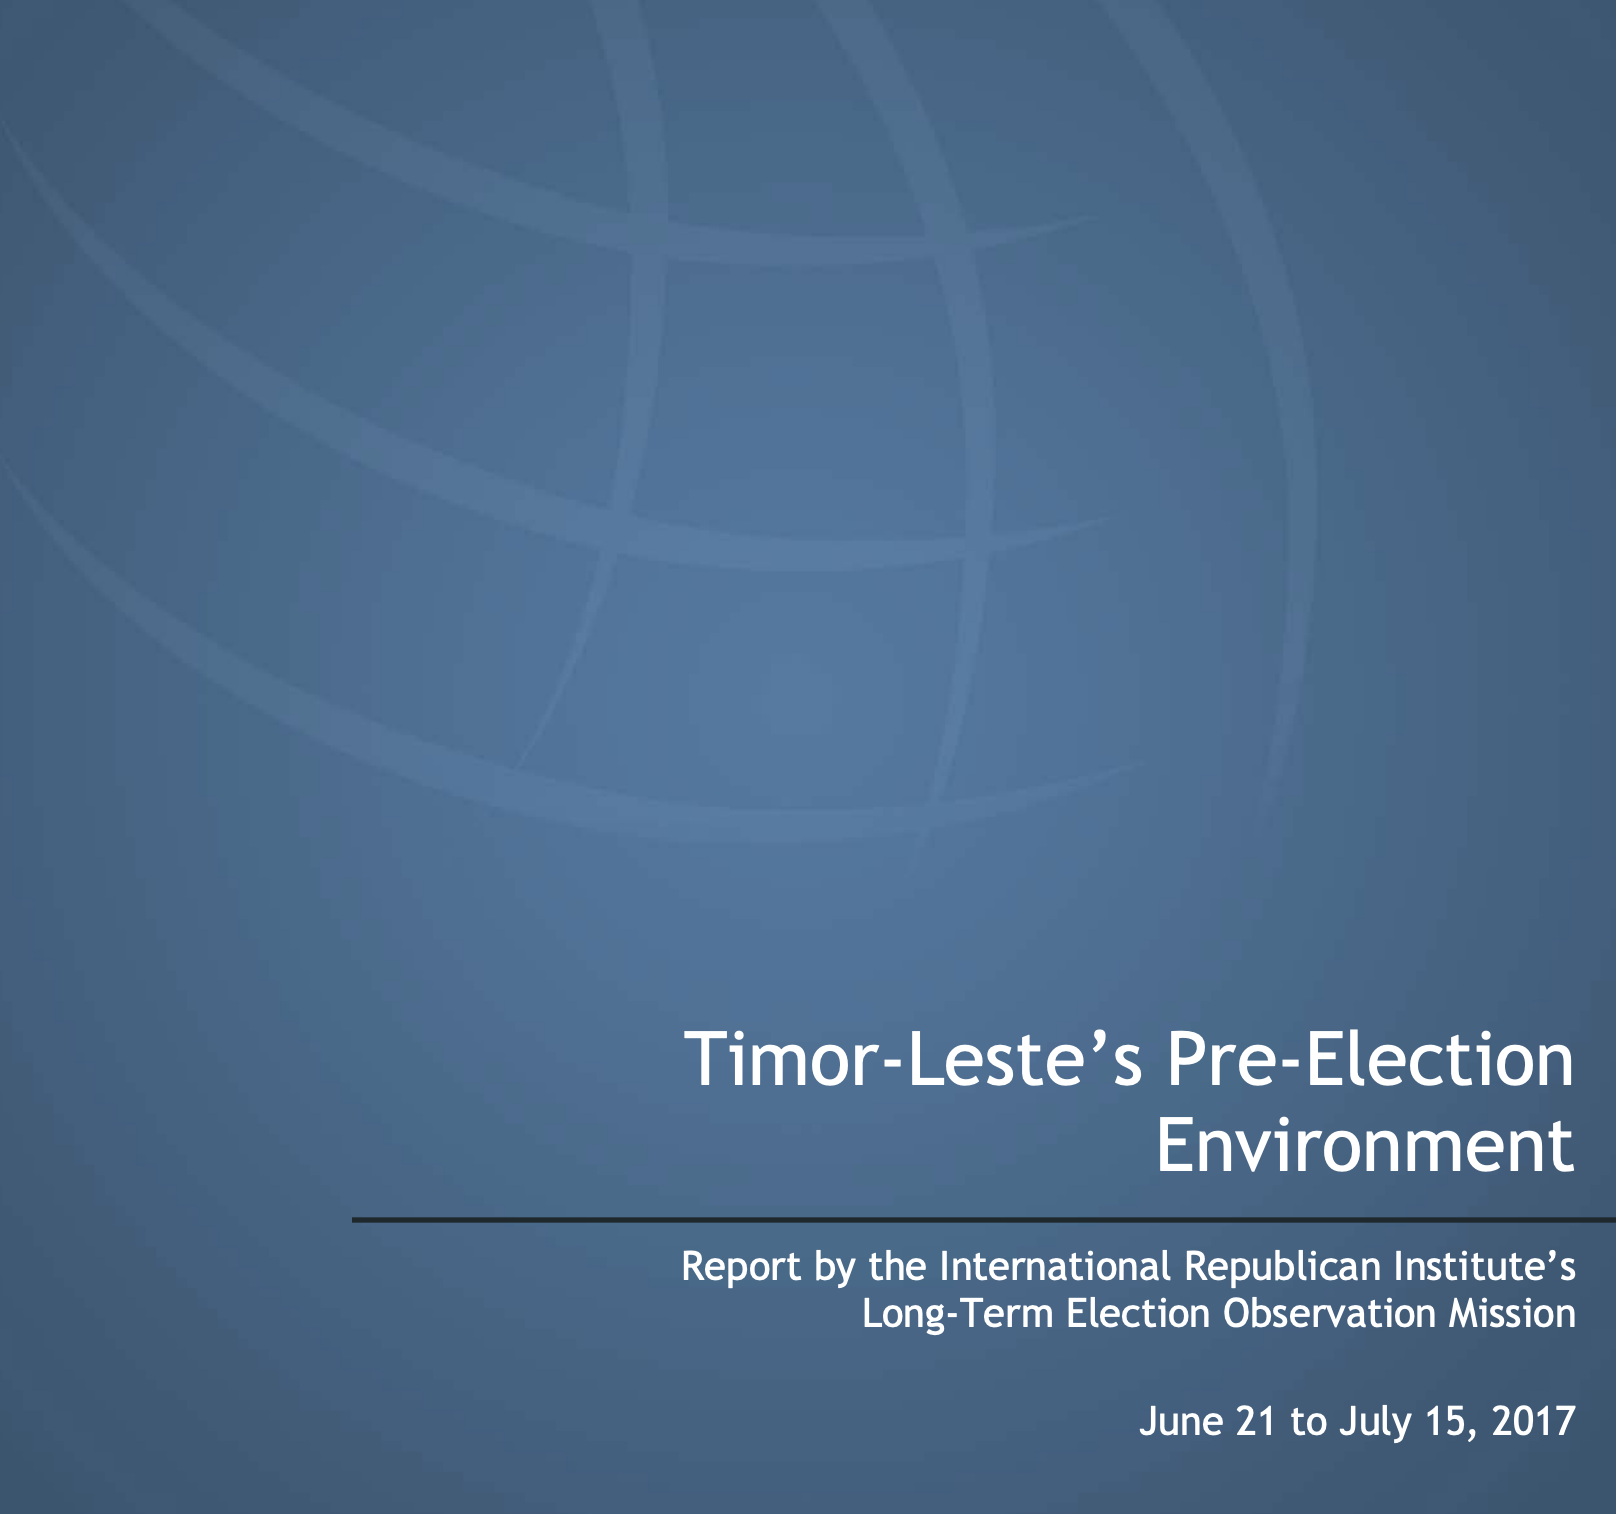 Timor-Leste’s Pre-Election Environment Report by the International Republican Institute’s Long-Term Election Observation Mission June 21 to July 15, 2017